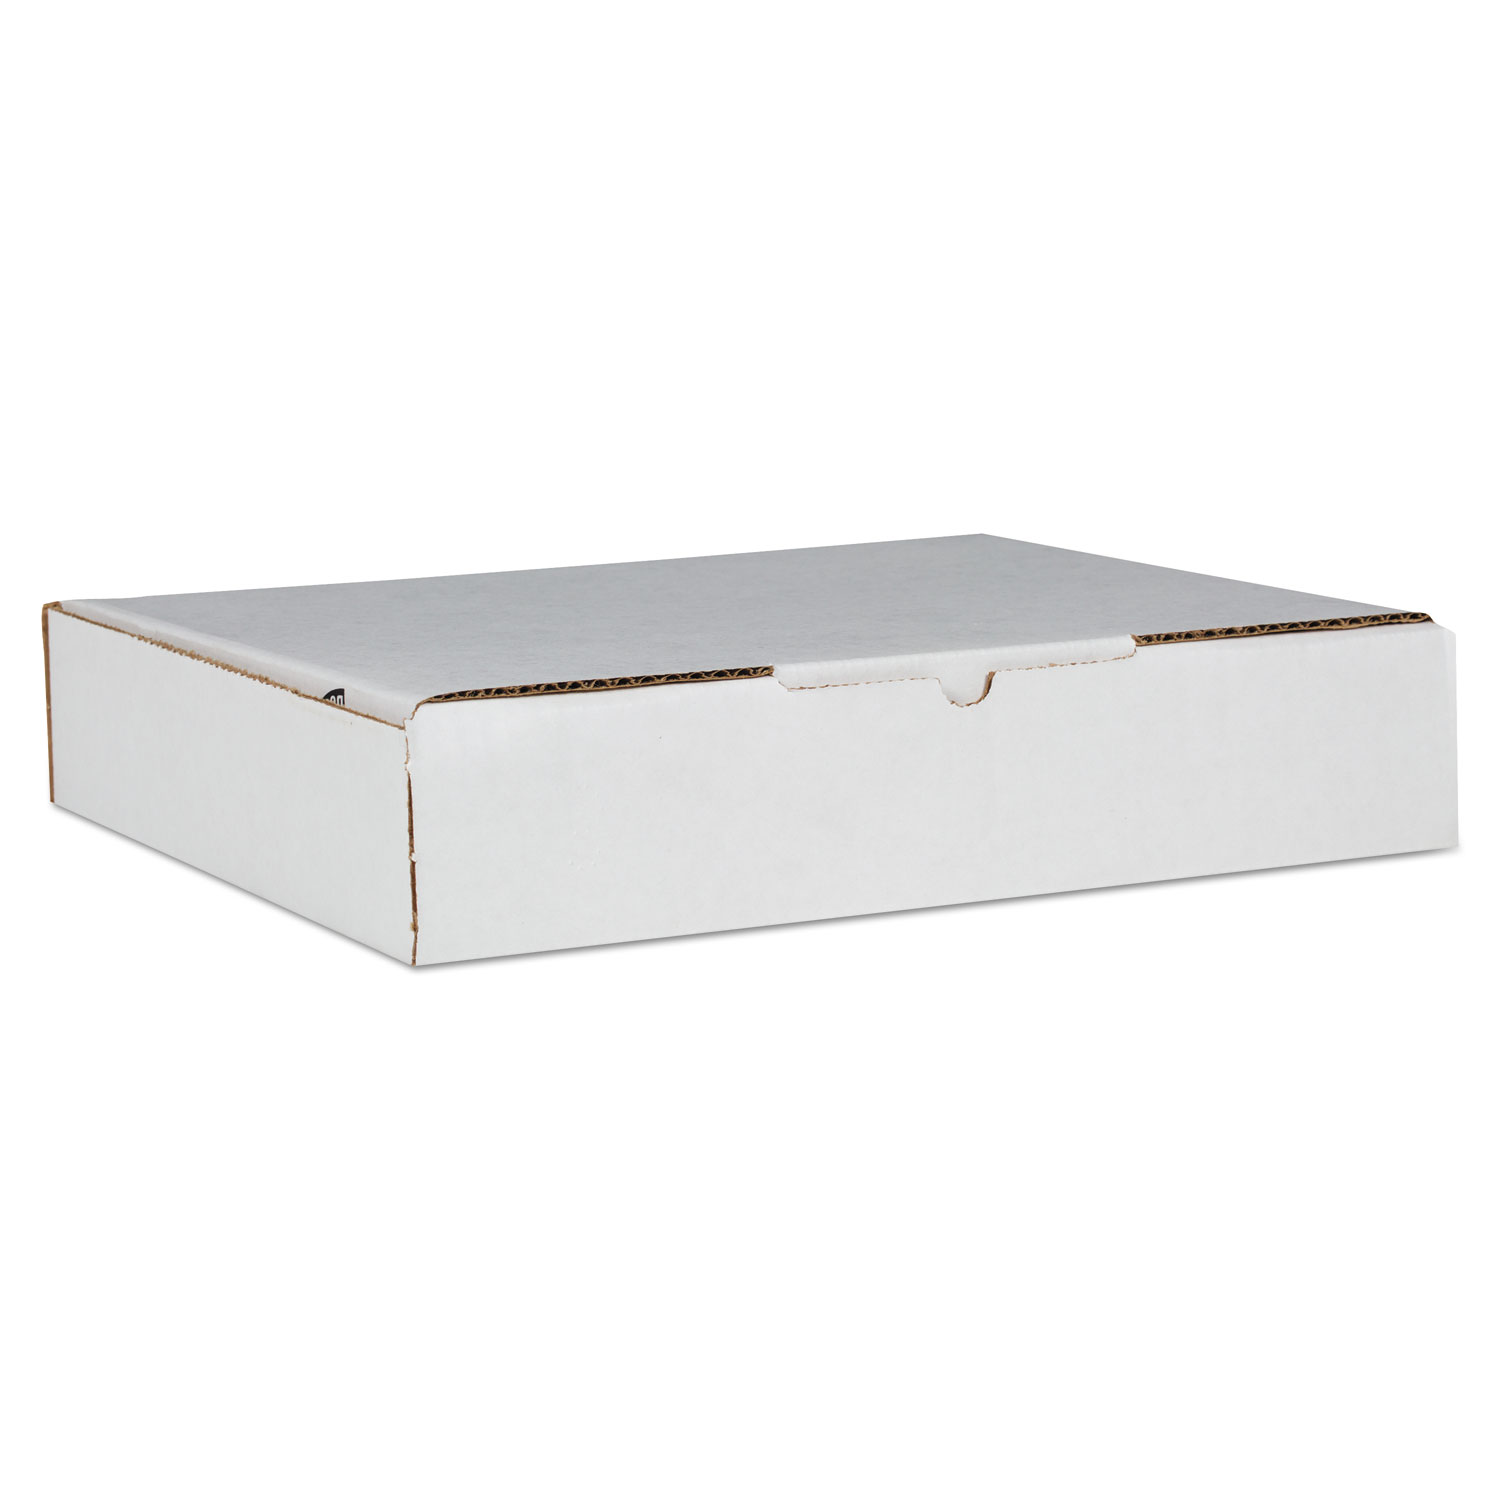 Self-Locking Mailing Box, Regular Slotted Container (RSC), 11.5